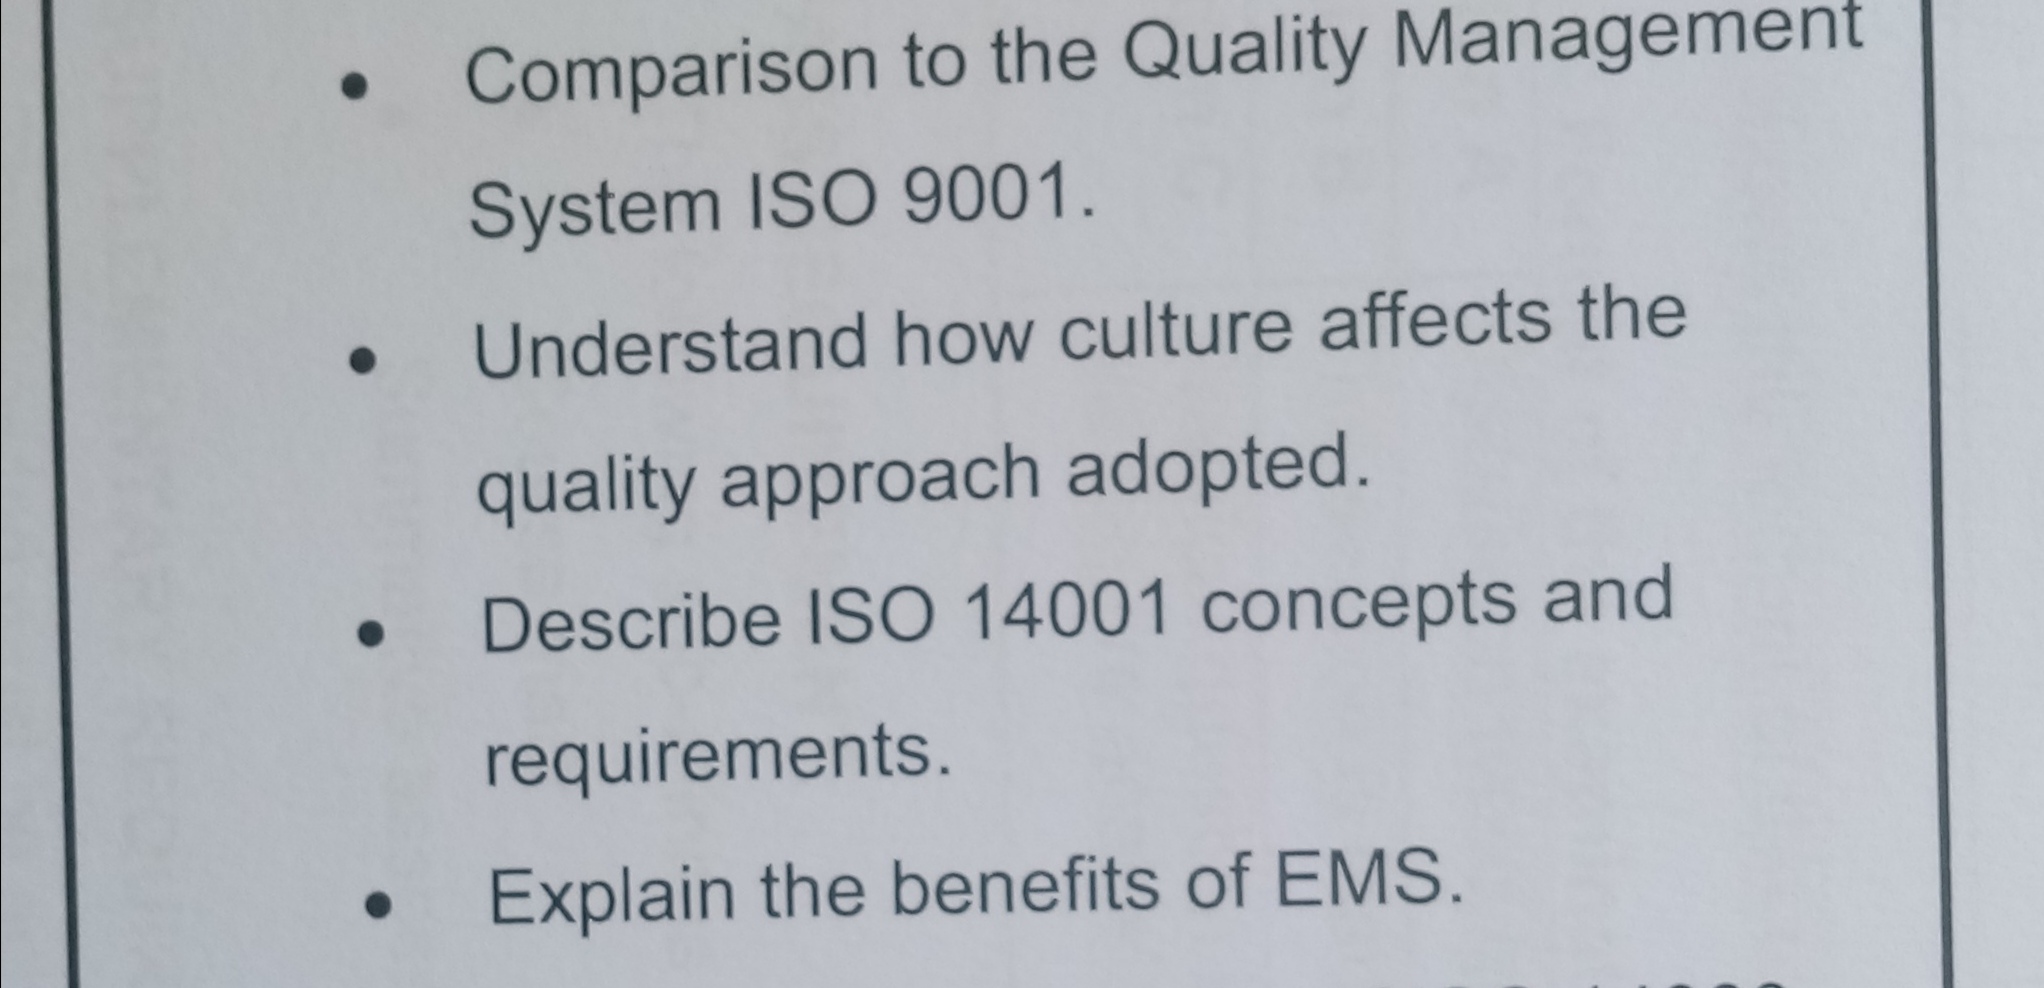 Comparison to the Quality Management System ISO 9001.  Understand how culture affects the quality approach